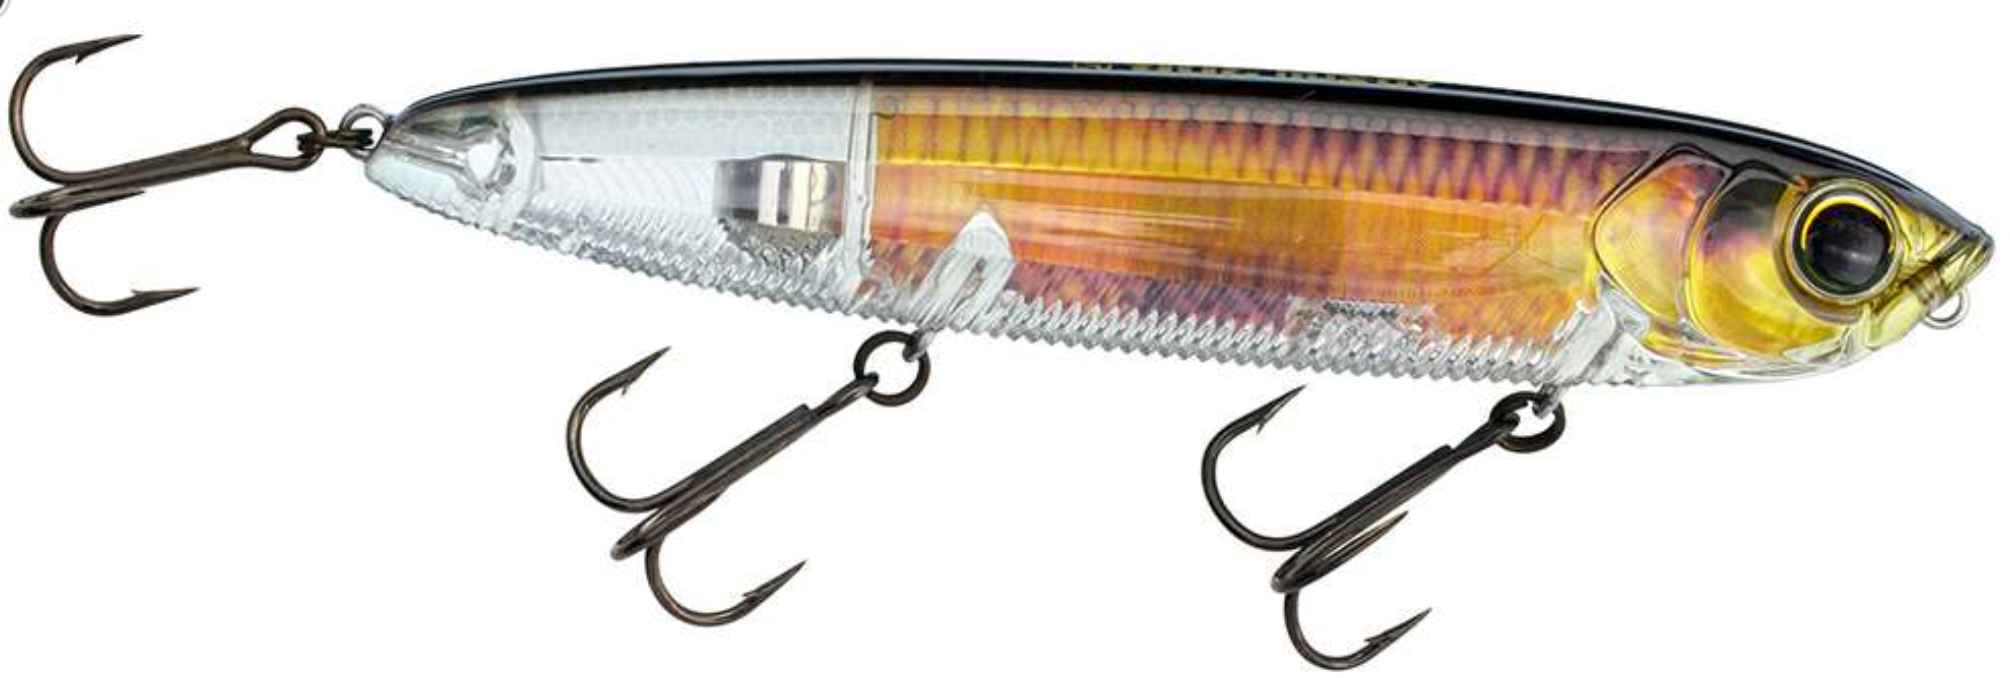 Cool Striped Bass Topwater Lures - Yozuri 3DB Pencil - Large Mouth Bass  Striped Bass